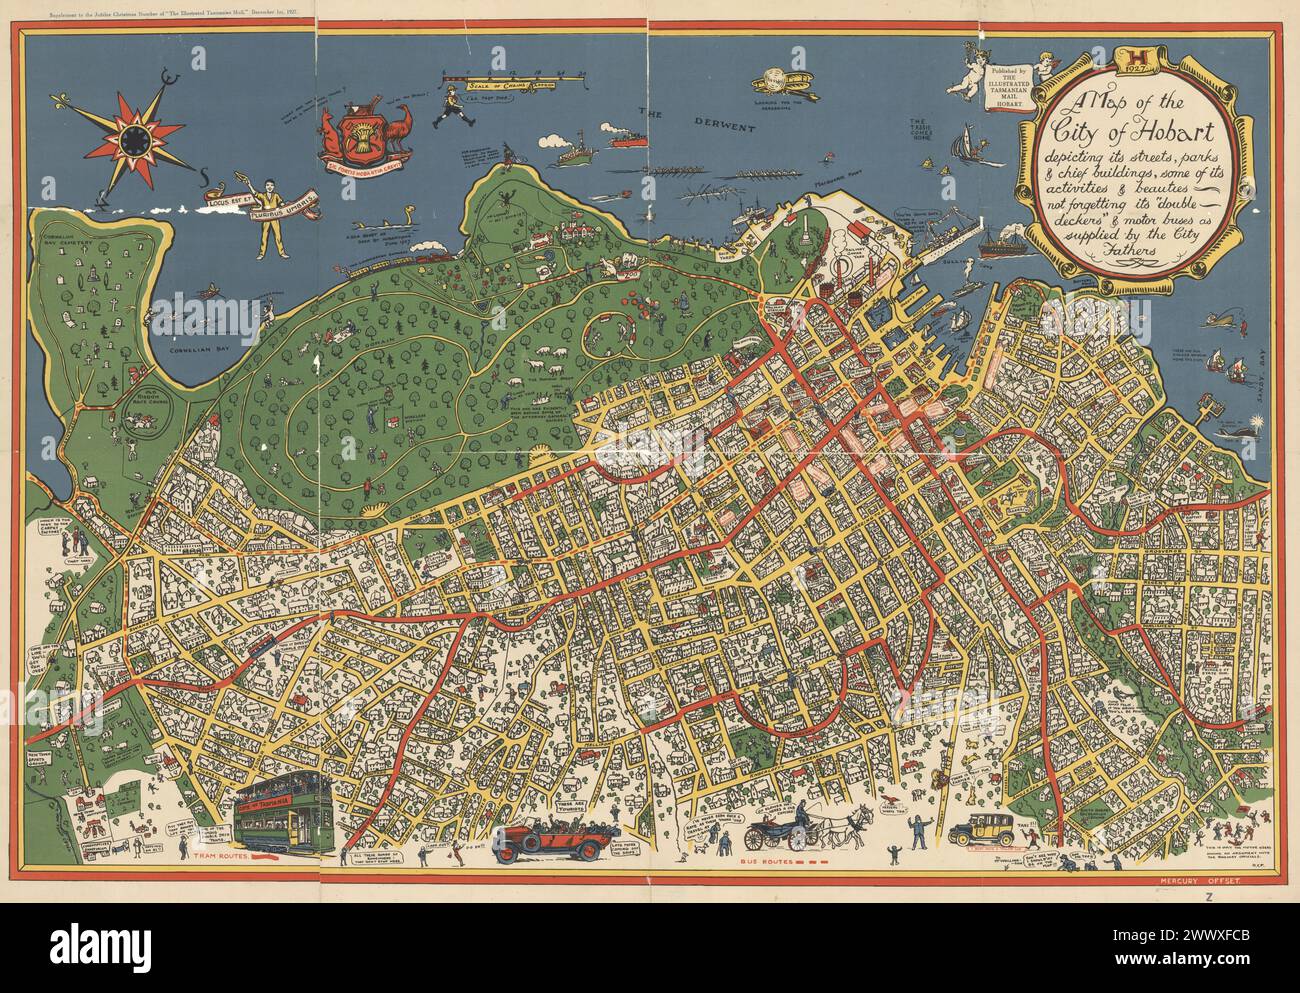 Vintage Pictorial Map. A map of the city of Hobart, Tasmania 1927  : depicting its streets, parks & chief buildings, some of its activities and beauties ... / Published by the Illustrated Tasmanian Mail, Hobart. Stock Photo